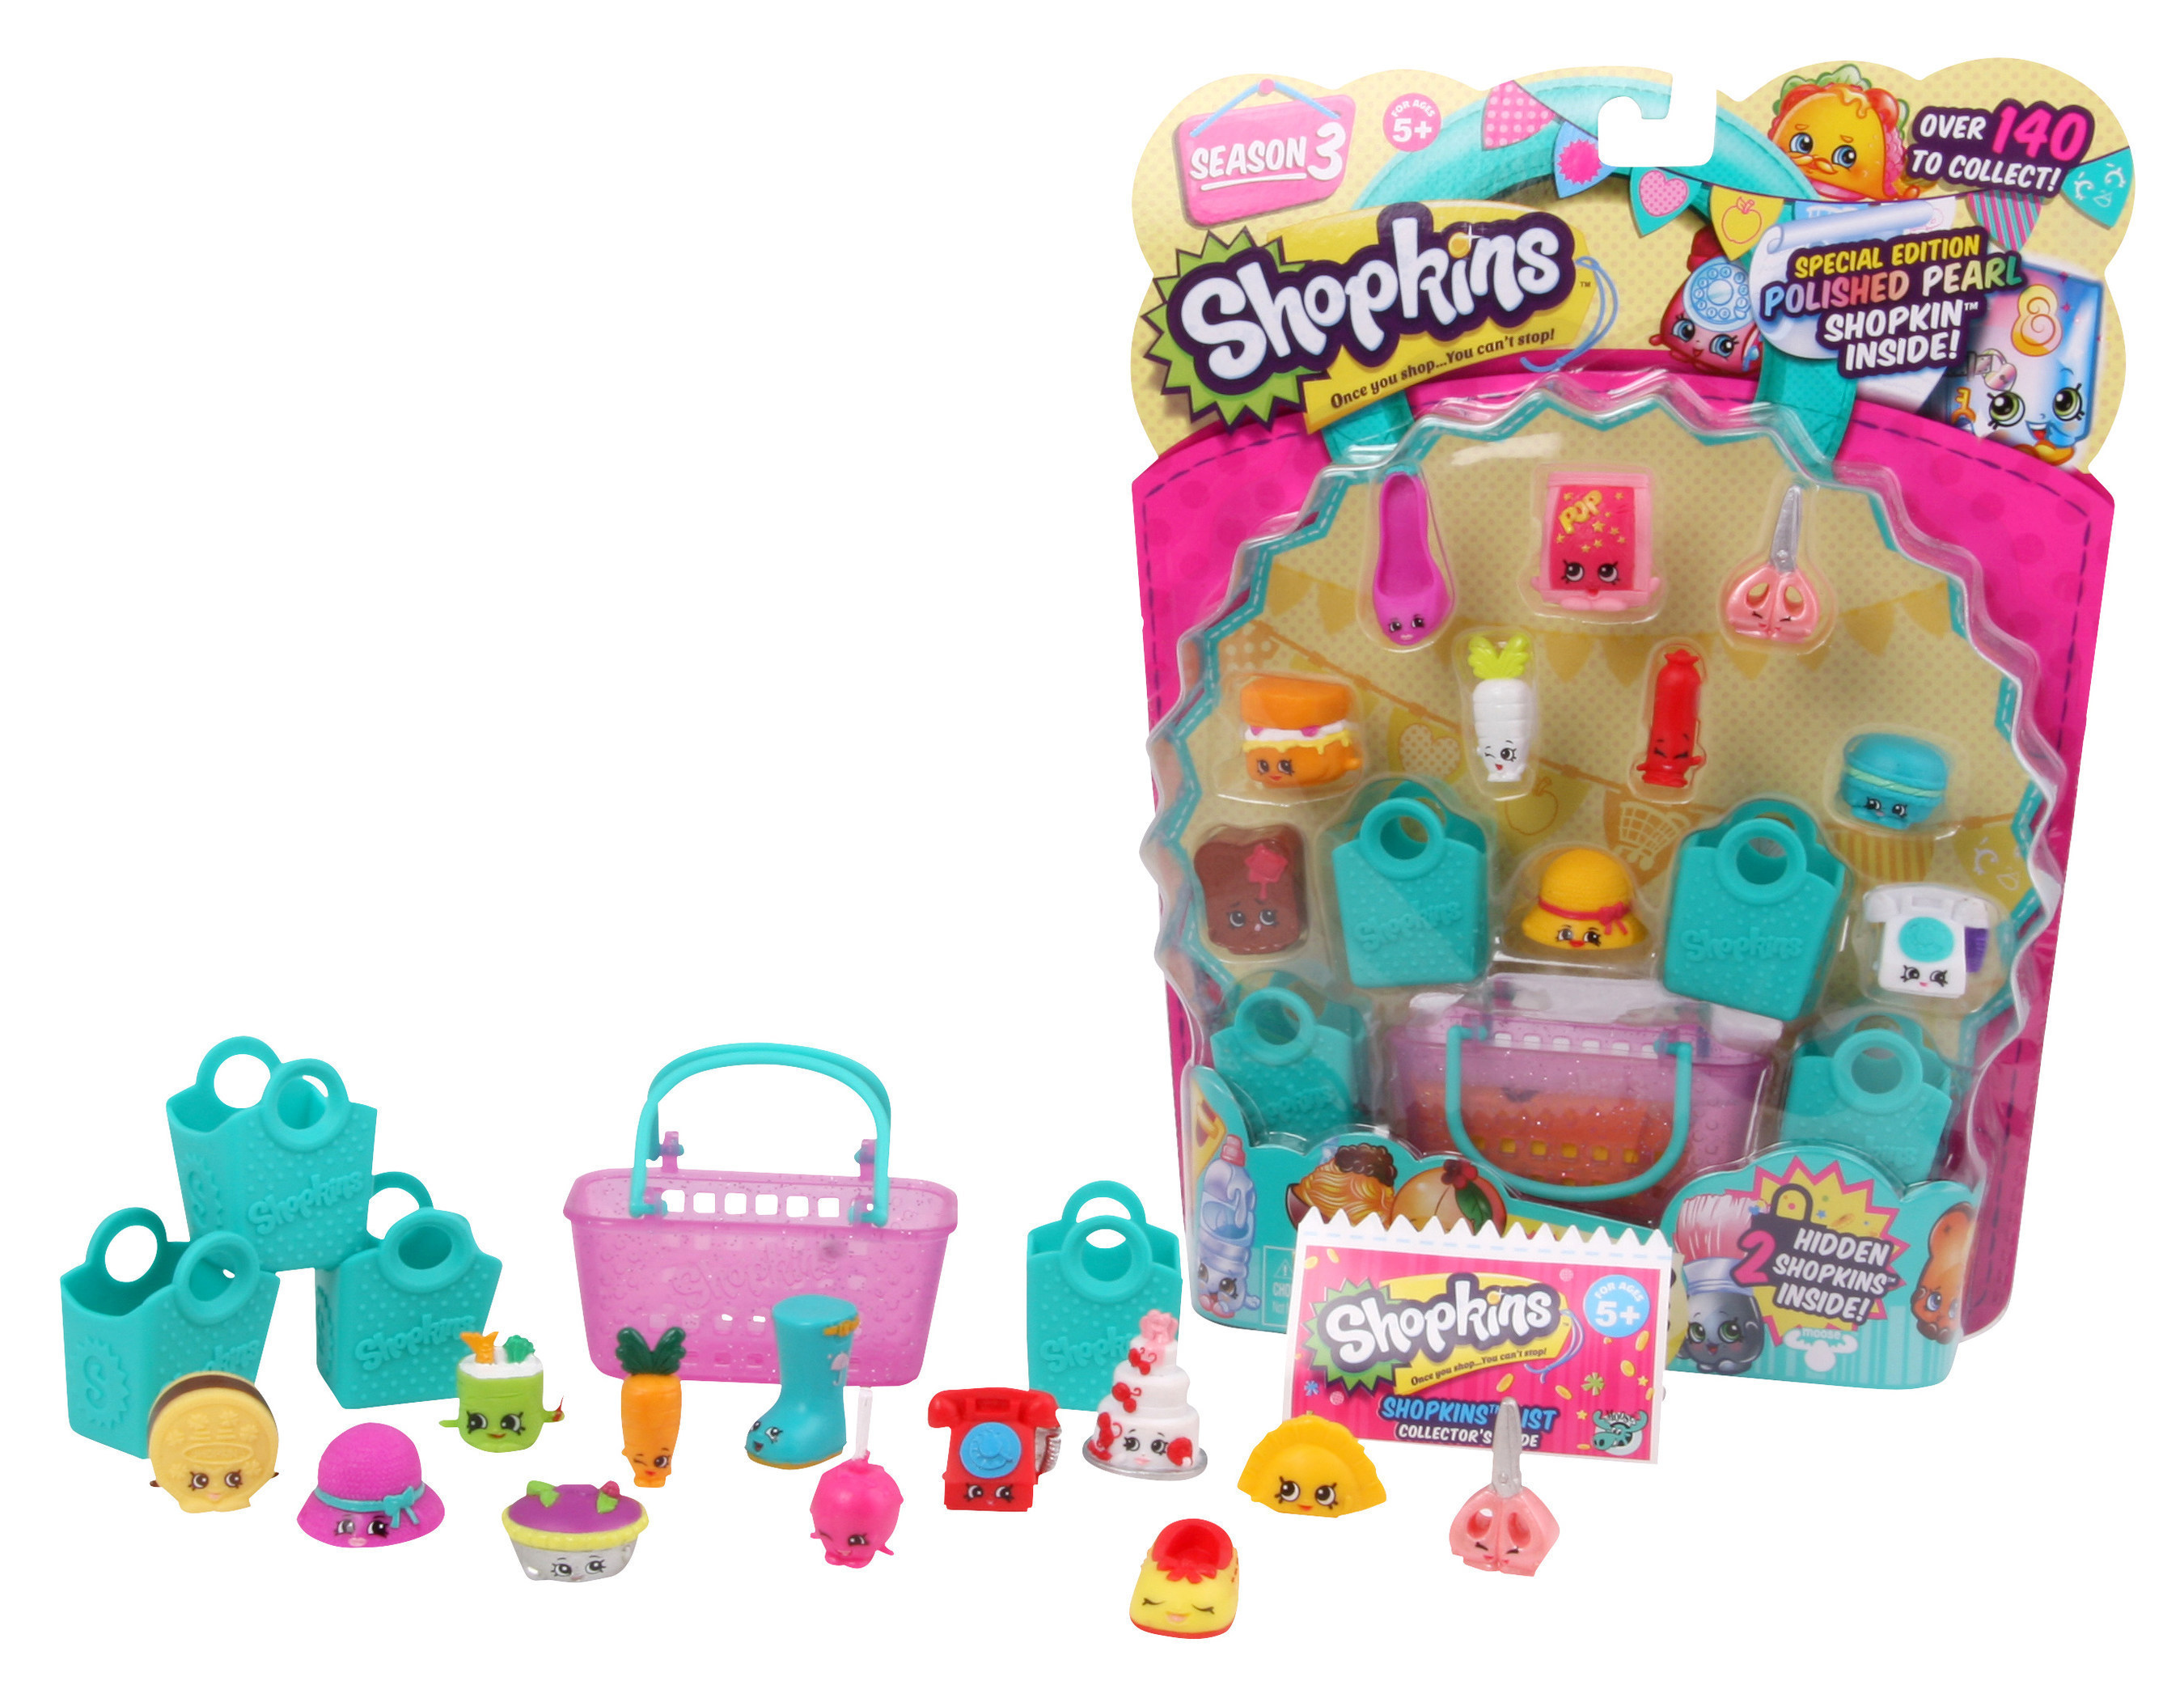 Moose Toys' Shopkins Named The 2015 Best-Selling Toy In The US